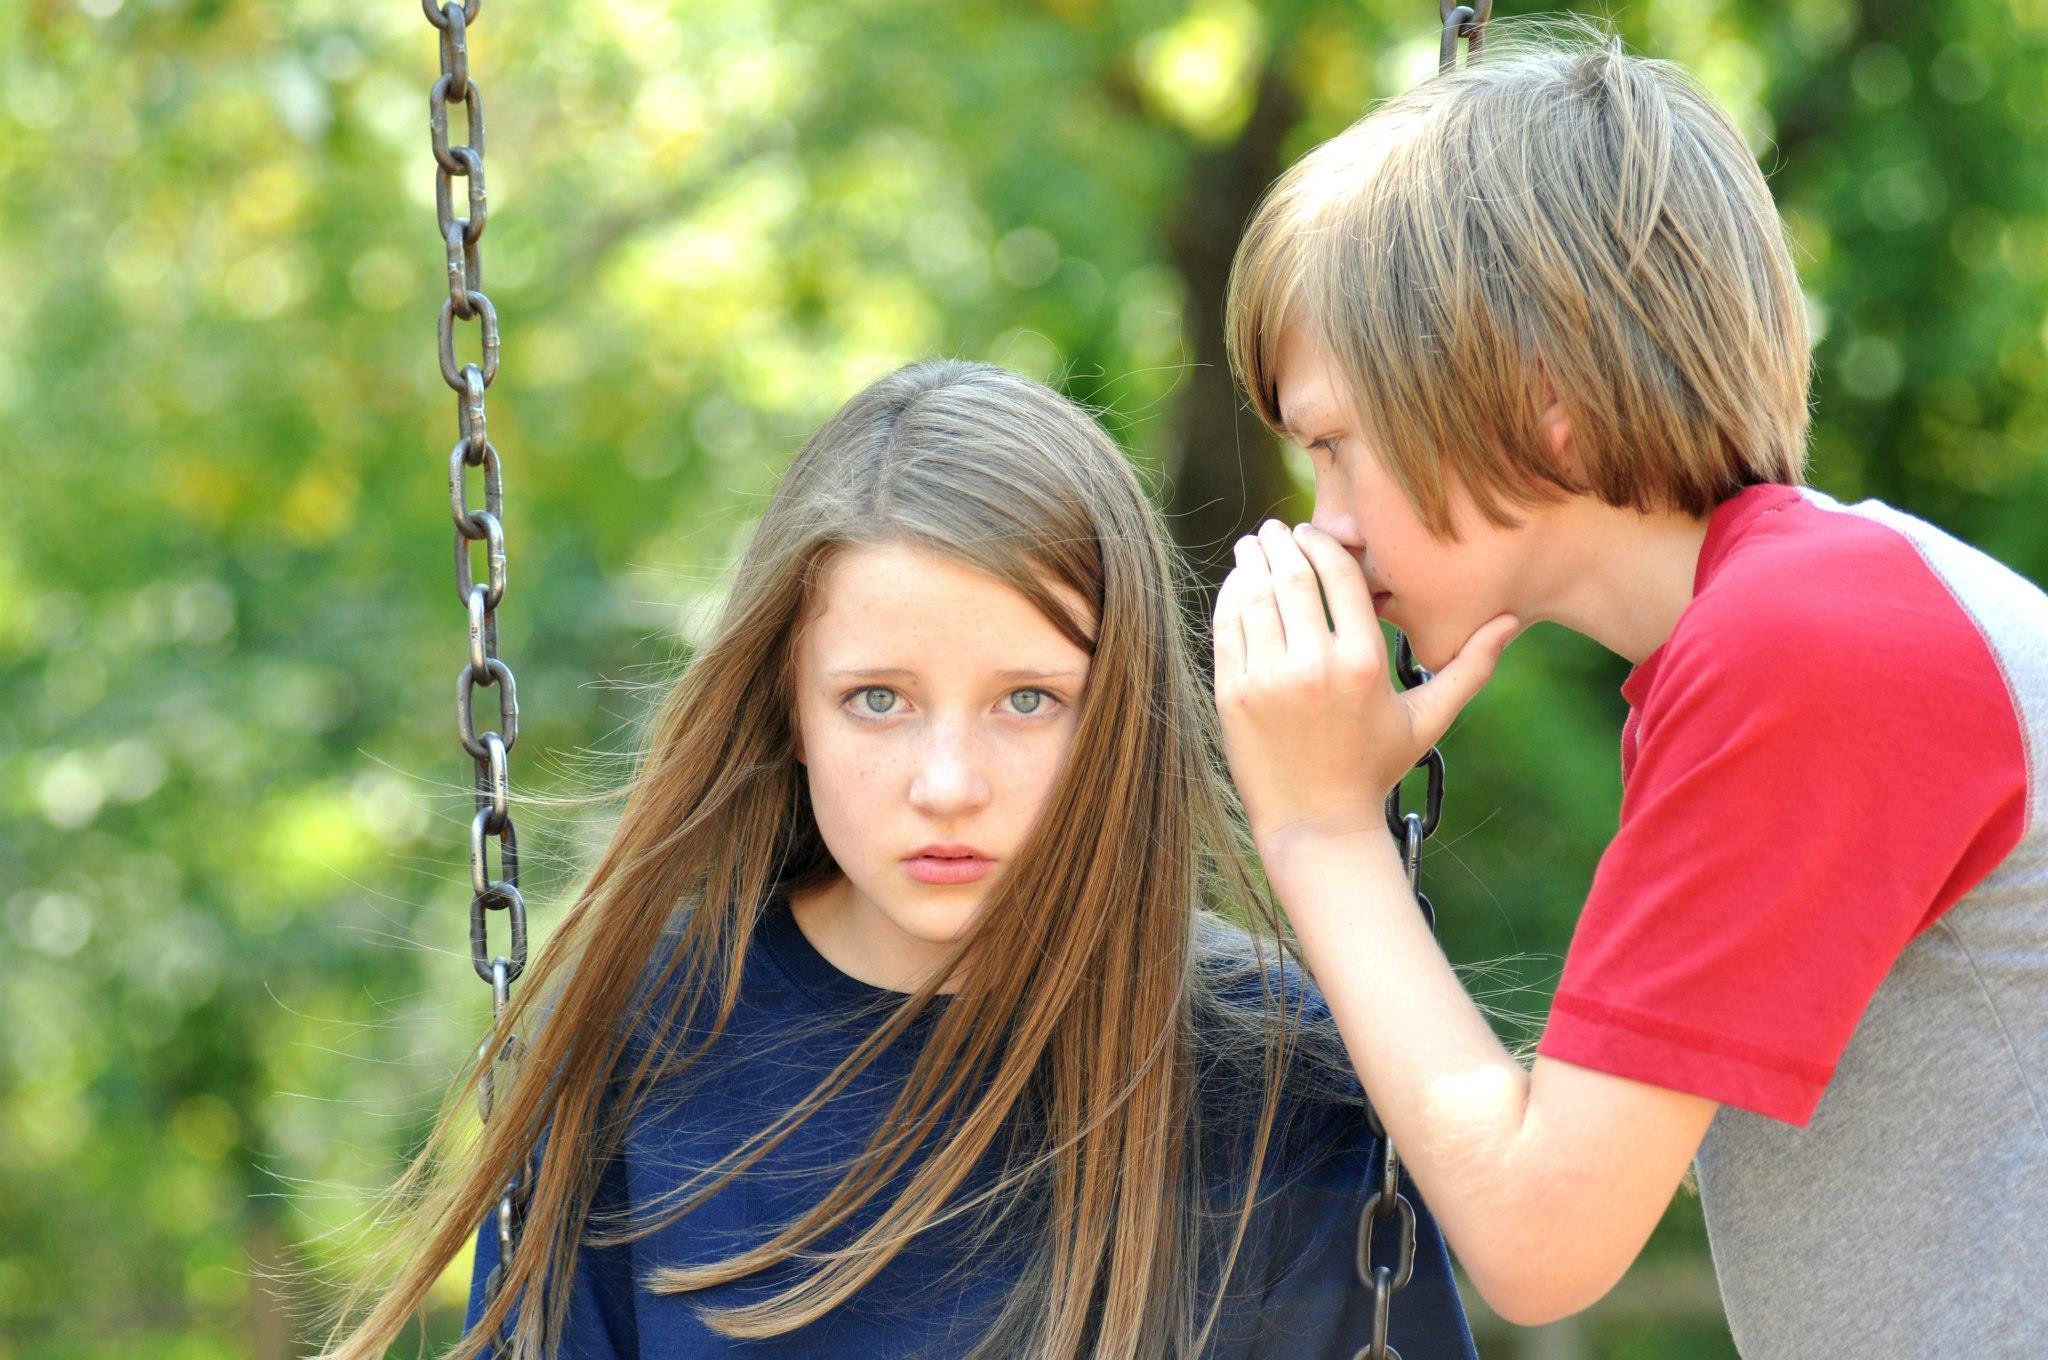 Lead actors Caleb Barwick, and Sami Isler in a publicity still from No One Knows.